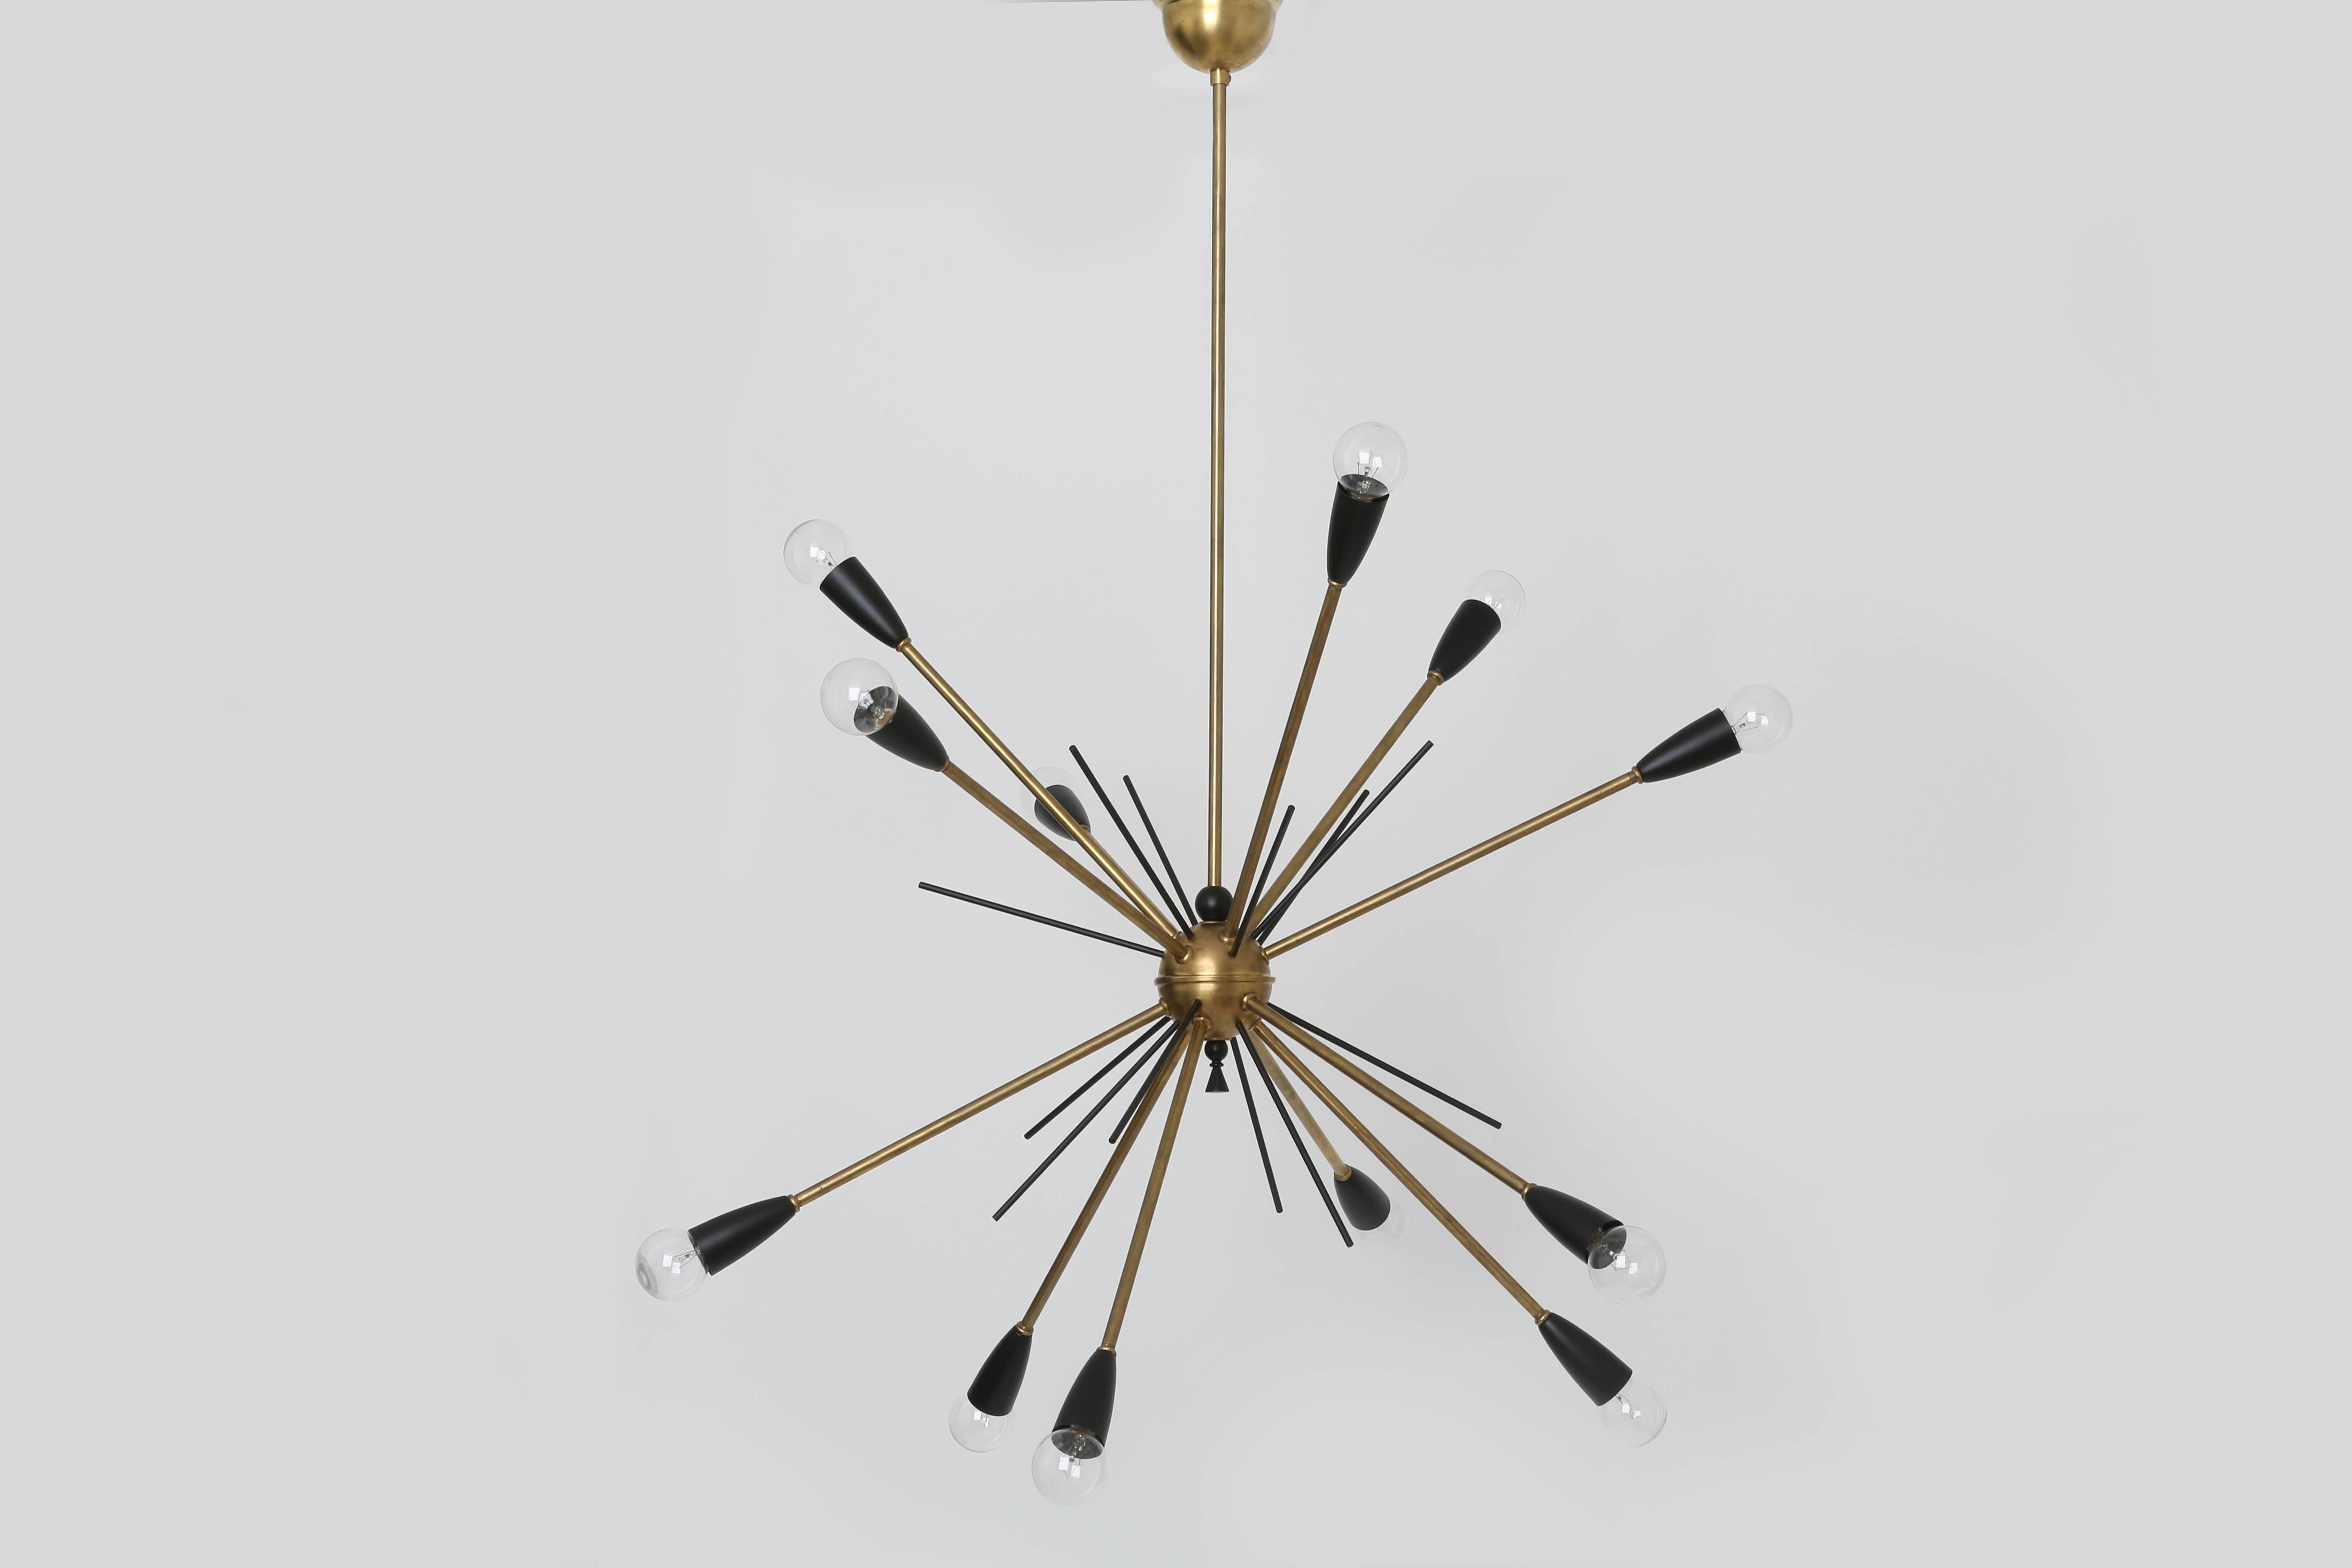 French Sputnik chandelier made out of brass with 12 brass arms, circa 1960s.
Brass has beautiful warm patina.